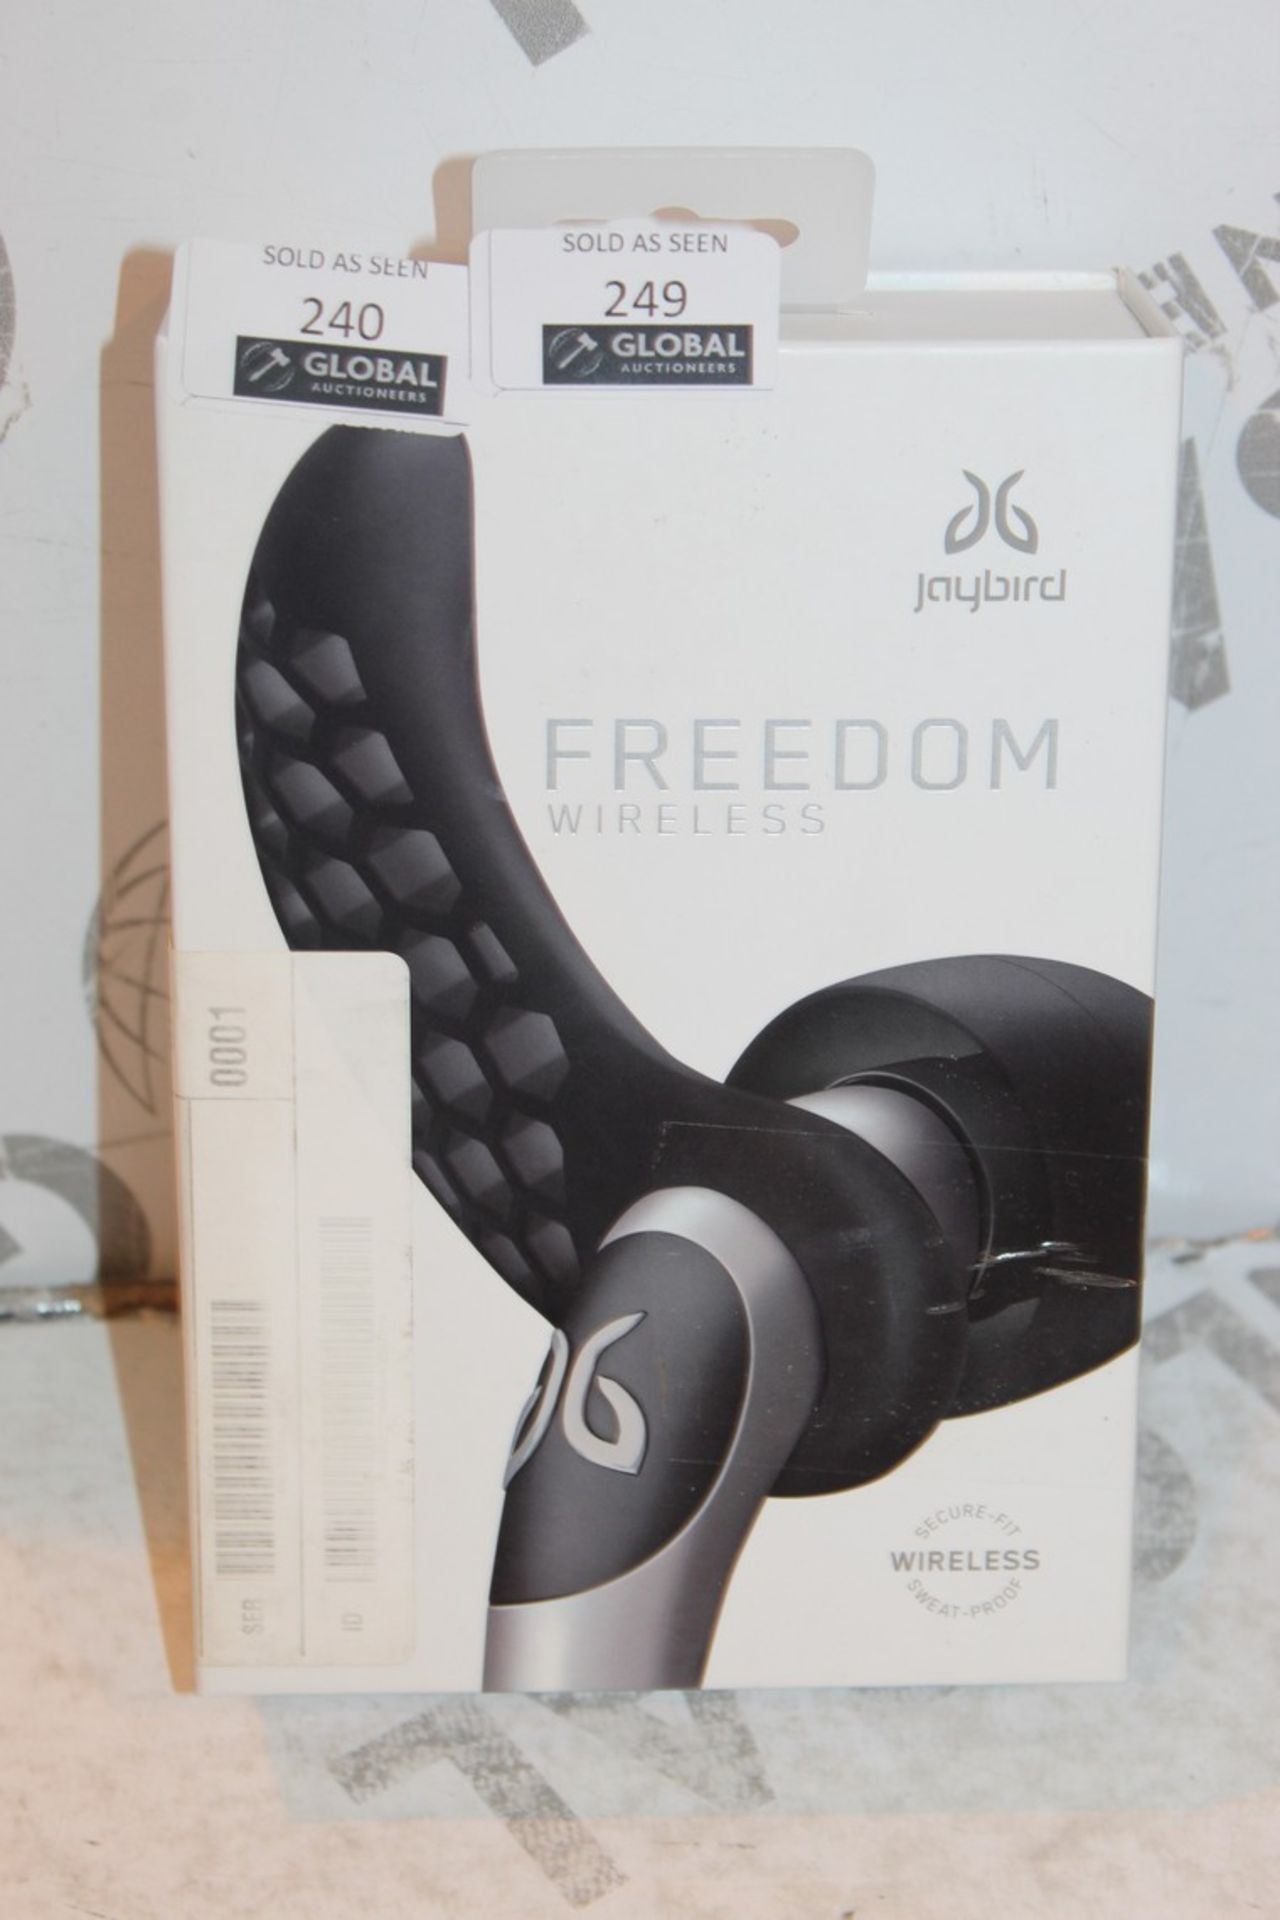 Boxed Pair JayBird Freedom Wireless Sweat Proof Ear Phones RRP £170 (Pictures Are For Illustration